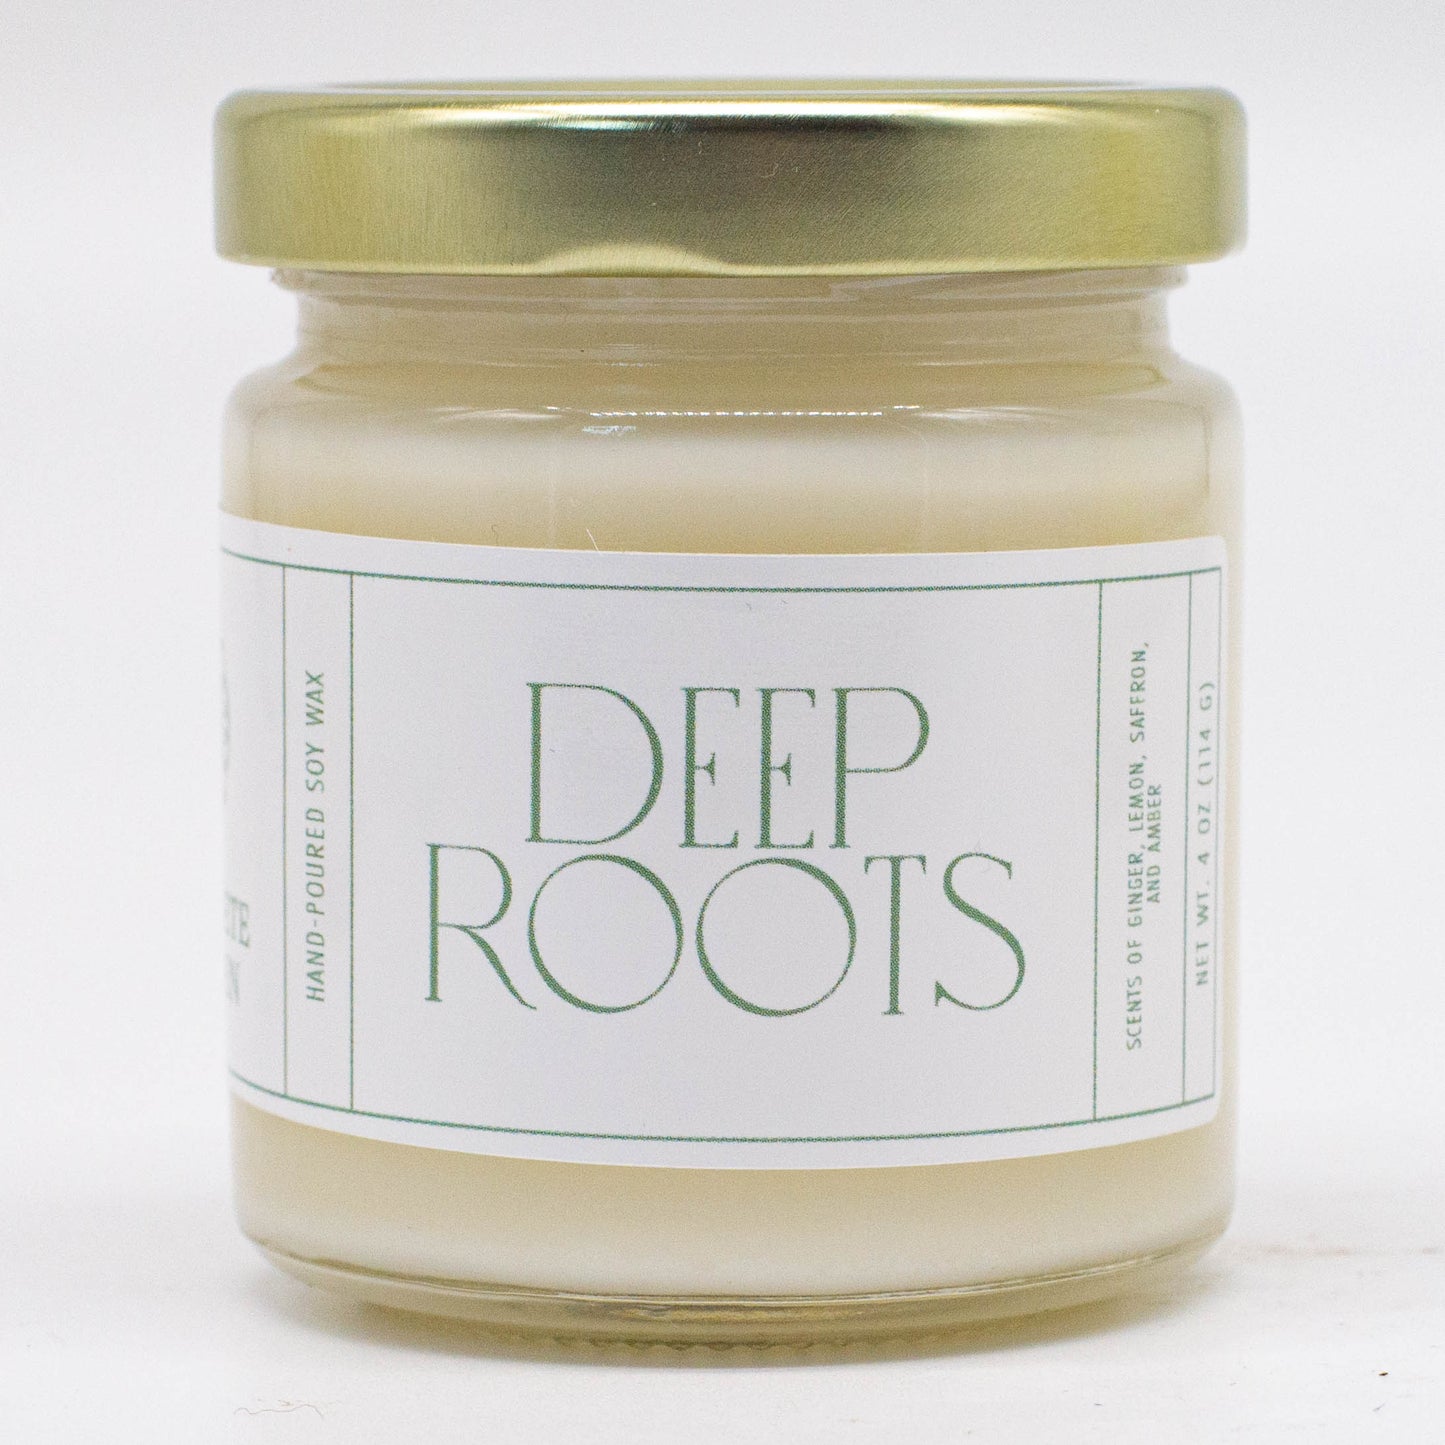 Deep Roots, Ginger and Lemon Soy Candle, 4 oz